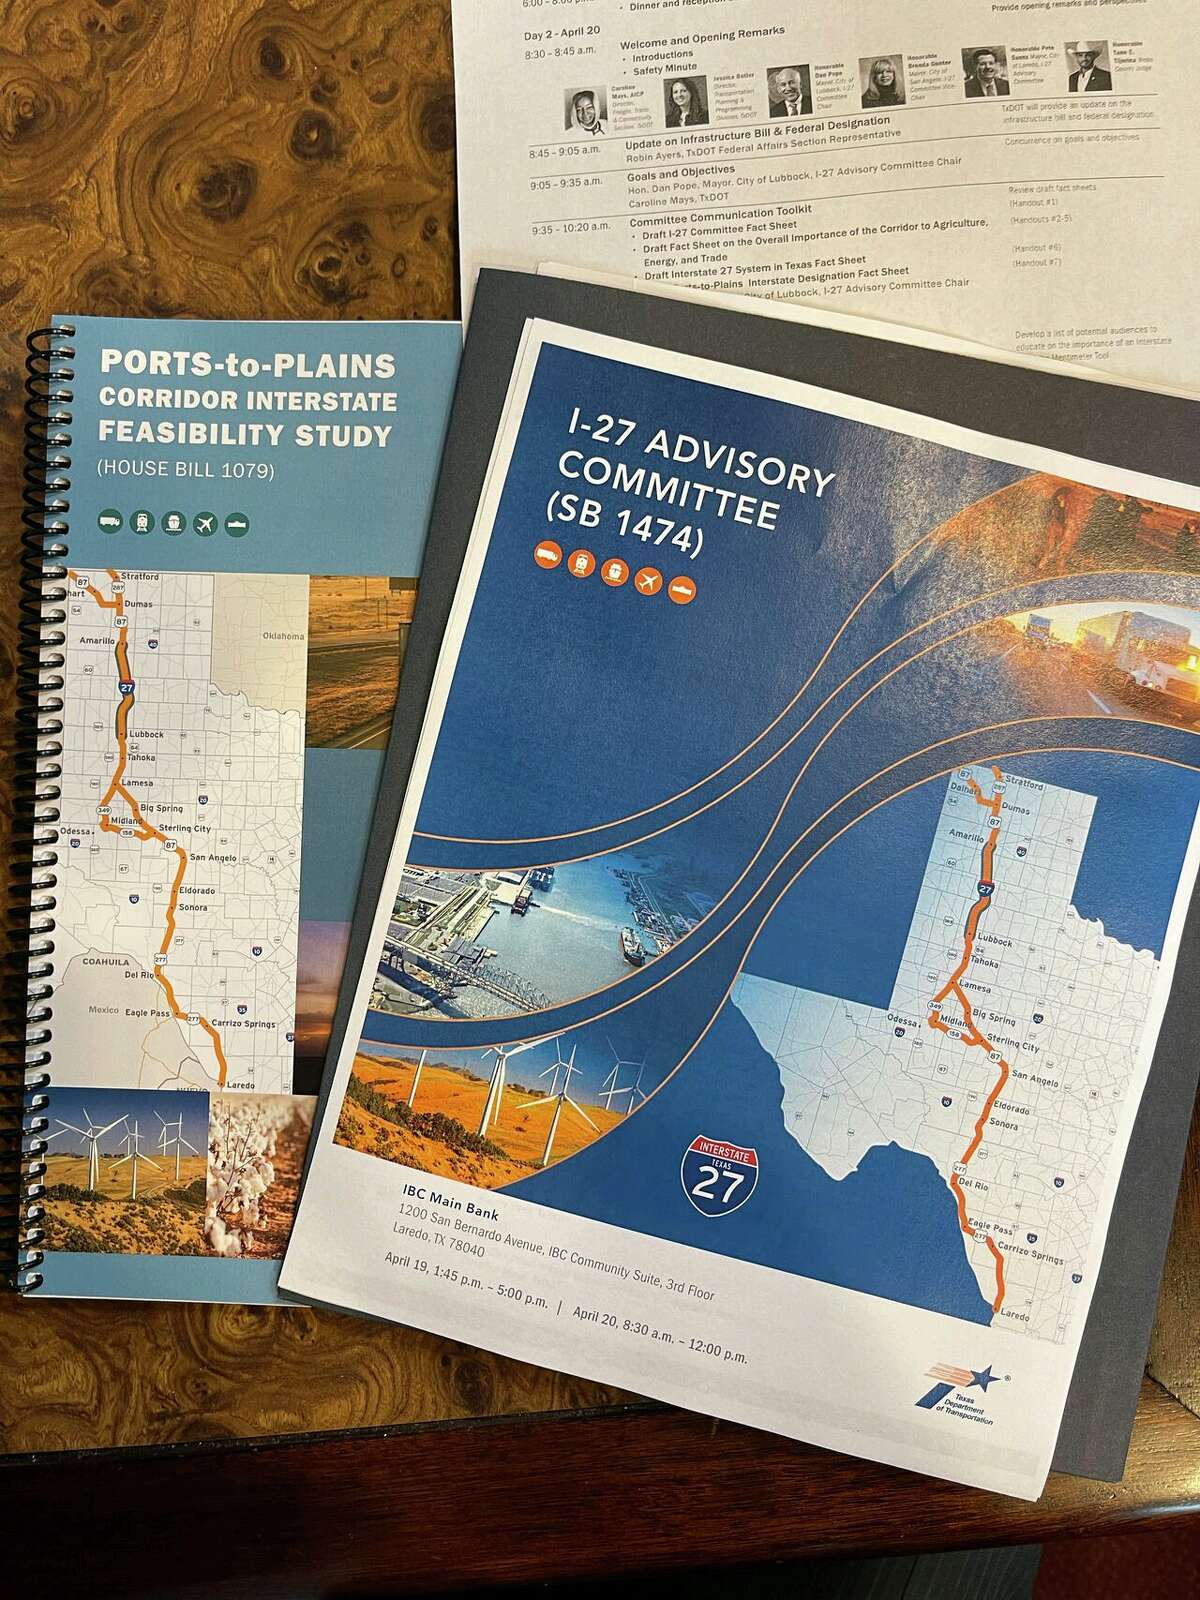 Documents are shown from a May 2022 I-27 advisory committee meeting.